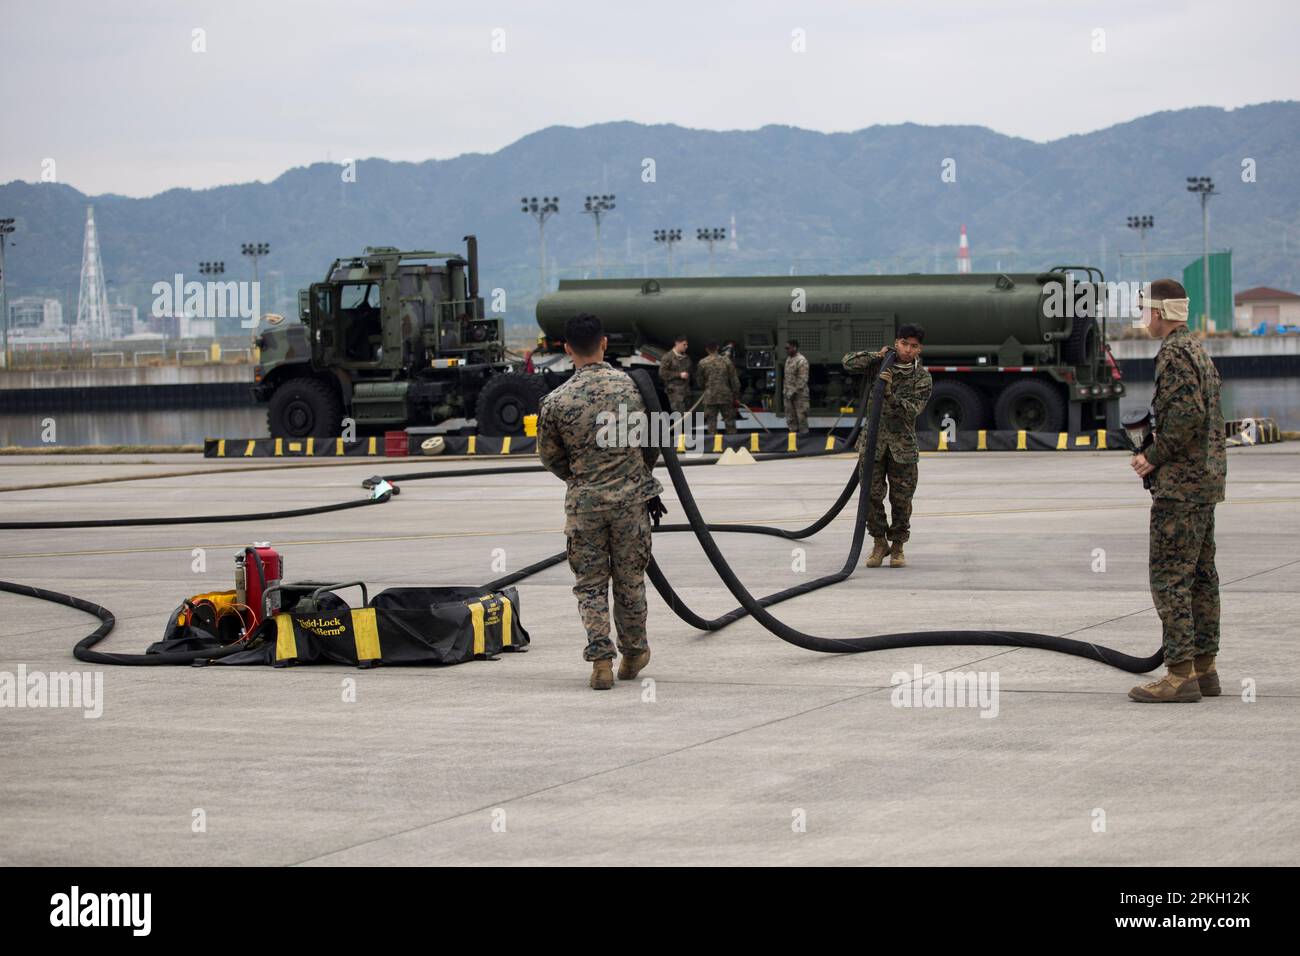 U.S. Marines with Marine Wing Support Squadron 171 carry fueling hoses to refuel an F-35B Lightning II aircraft at Marine Corps Air Station, Iwakuni, Japan, april 5, 2023. Marines with Marine Aircraft Group 12 routinely conduct arming, expeditionary refueling and flight operations to maintain proficiency and readiness in support a free and open Indo-Pacific. (U.S. Marine Corps photo by Lance Cpl. Samantha Rodriguez) Stock Photo